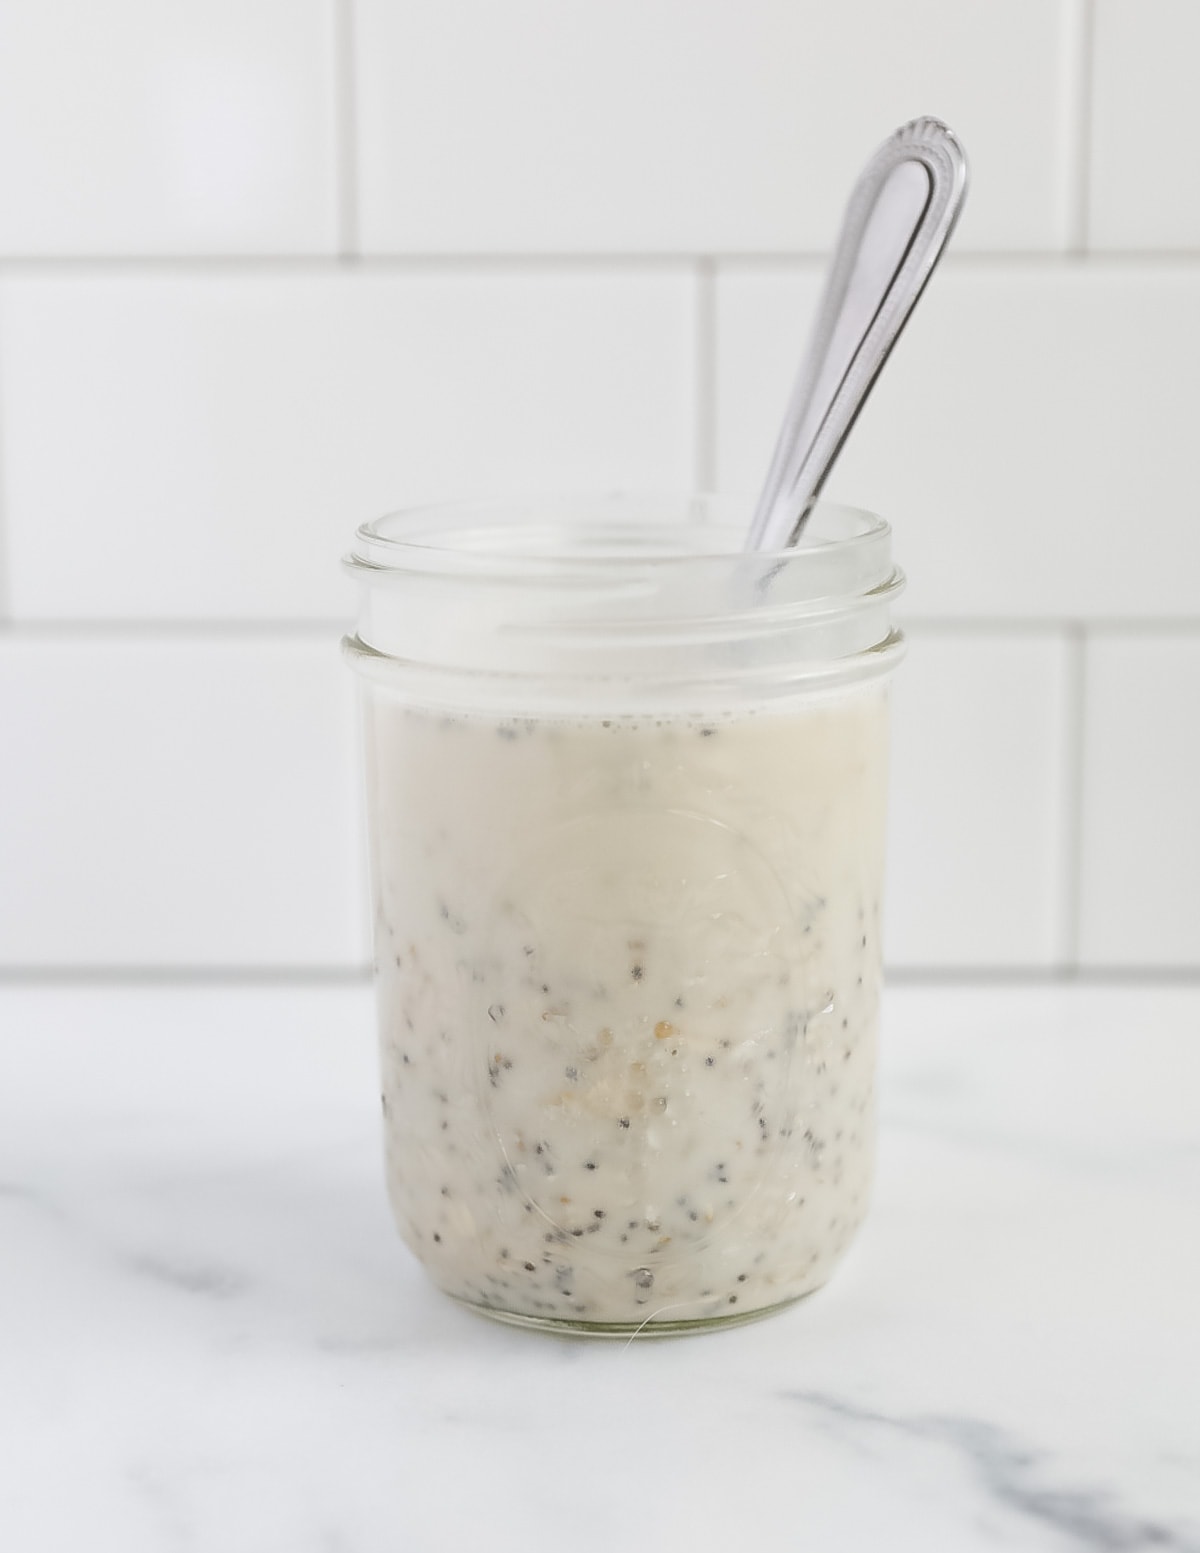 A mason jar with unmixed oatmeal and plant based milk. There is a spoon in the jar